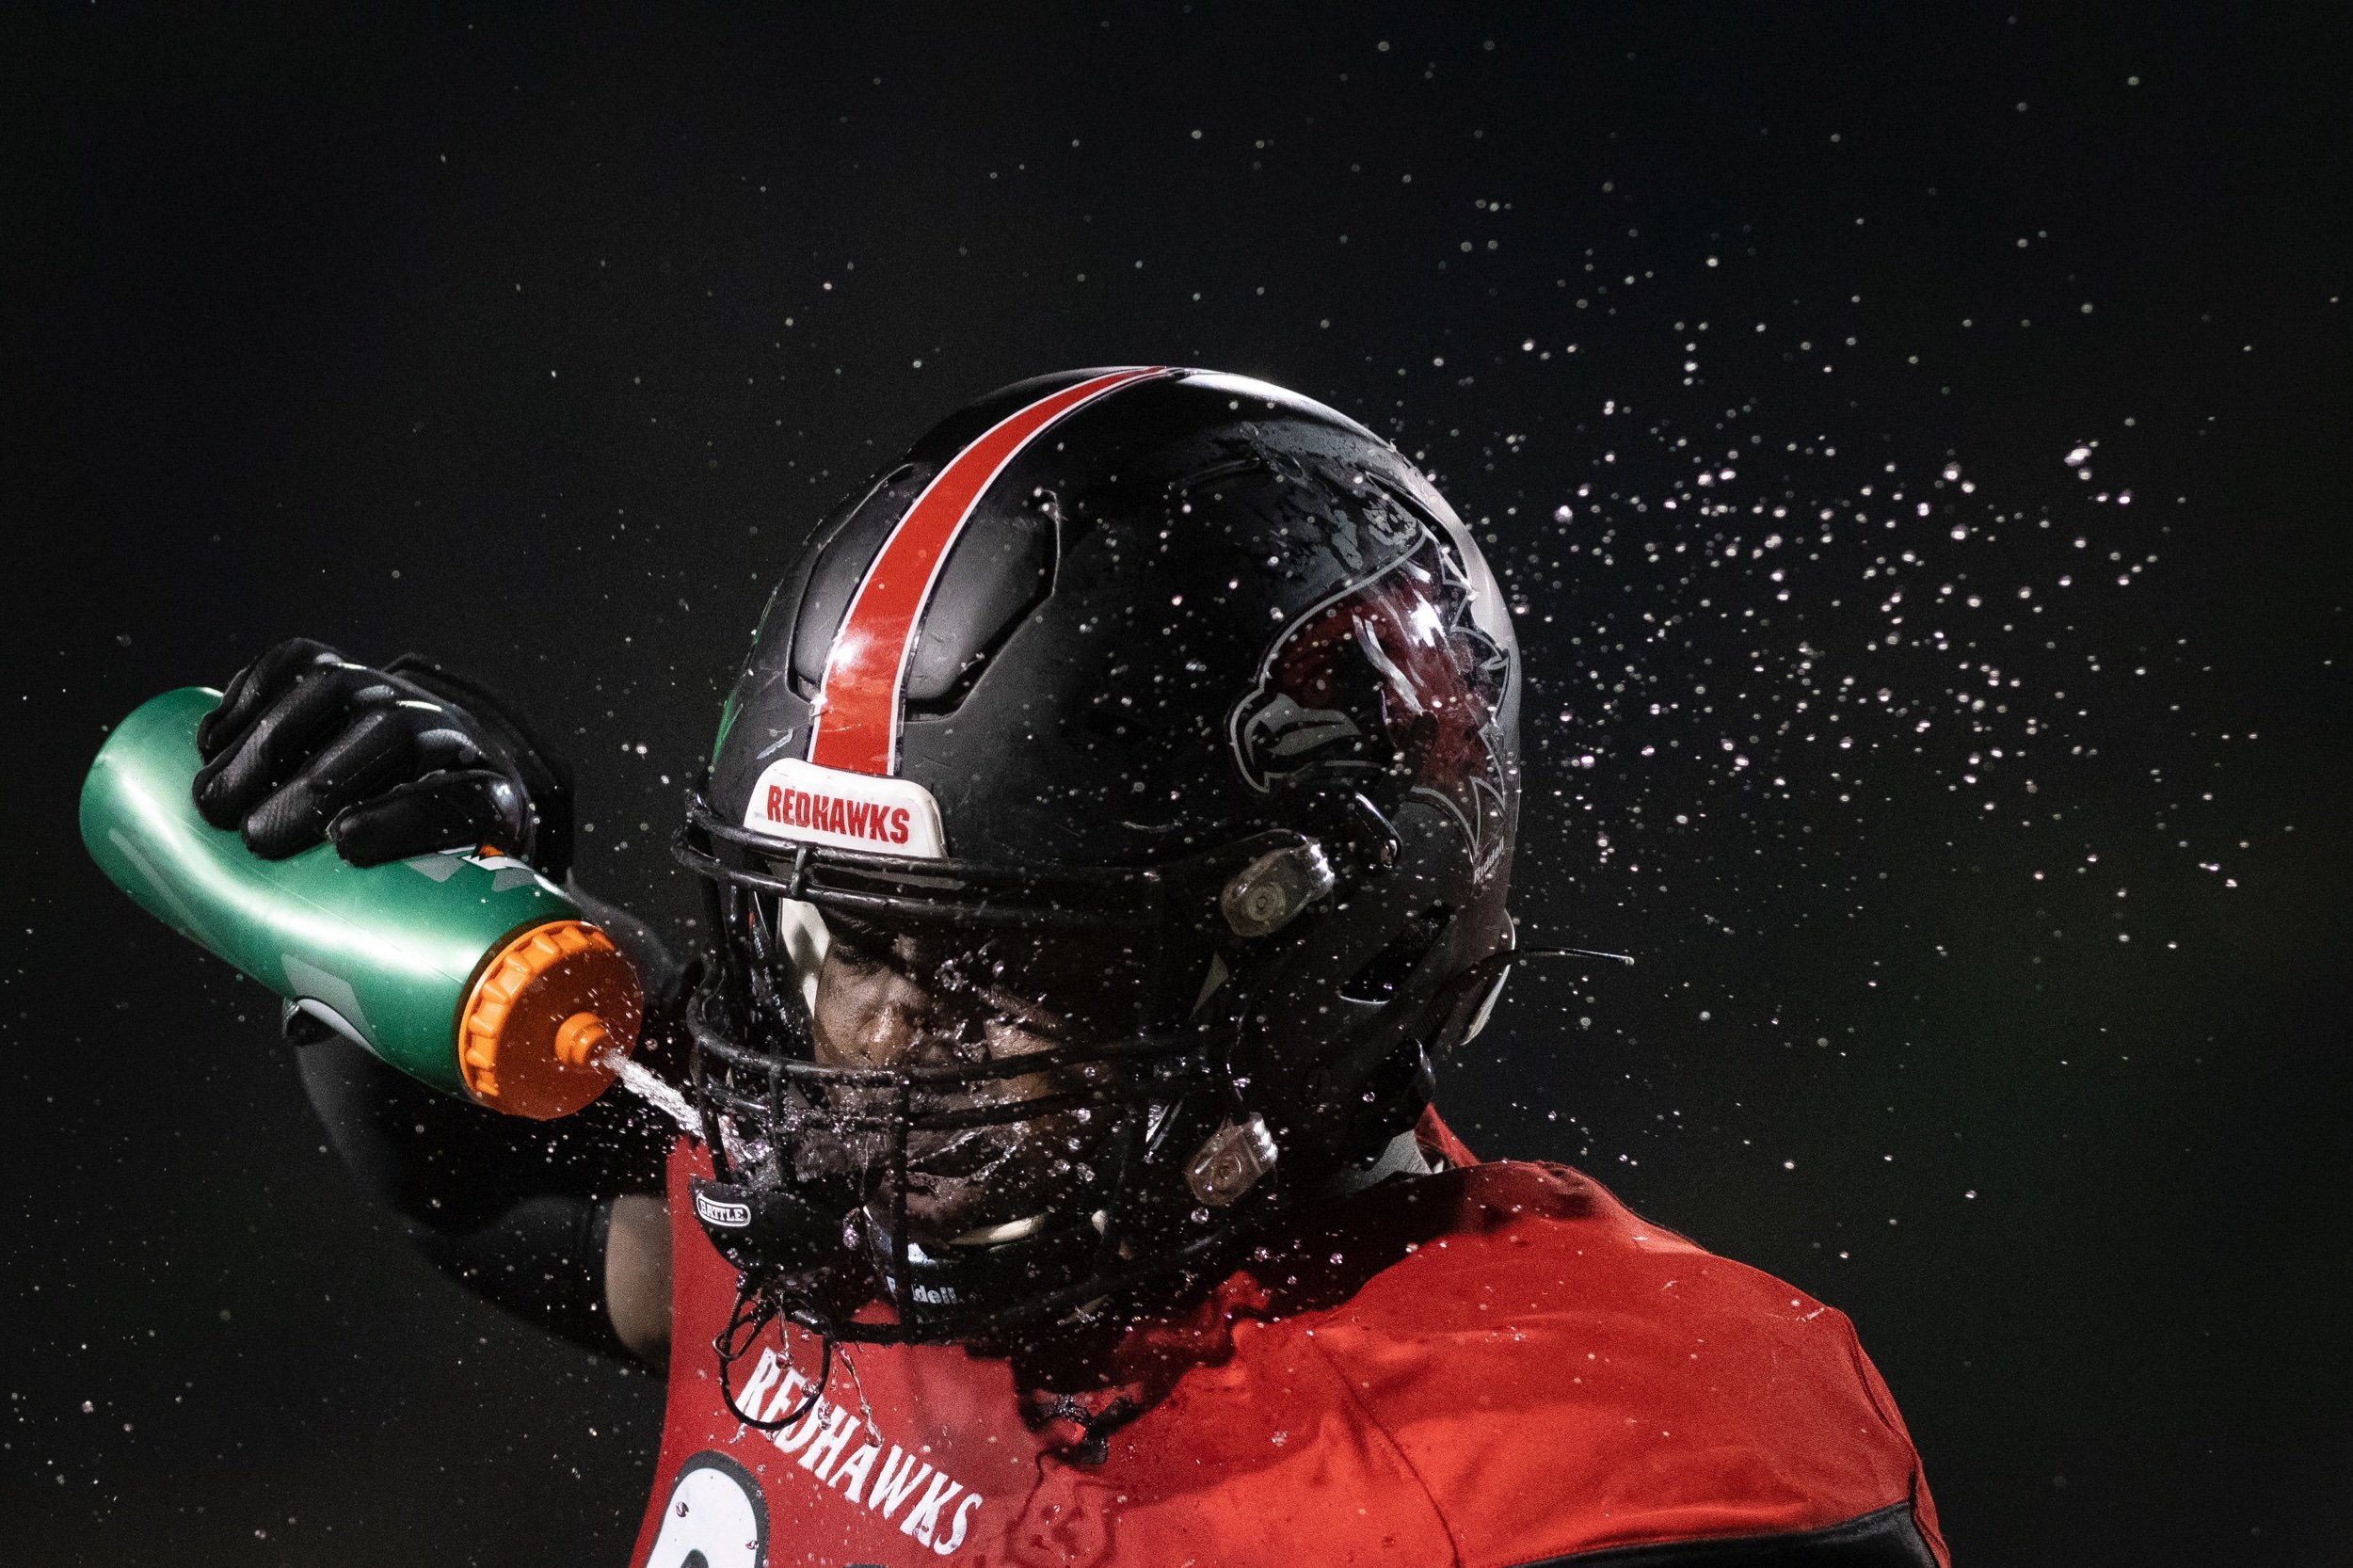  Southeast Missouri State defensive lineman Daterraion Richardson (99) gets a drink during the Redhawks' 43-37 double-overtime win against the Tennessee Tech Golden Eagles on Oct. 5 at Houck Stadium in Cape Girardeau, Missouri. 